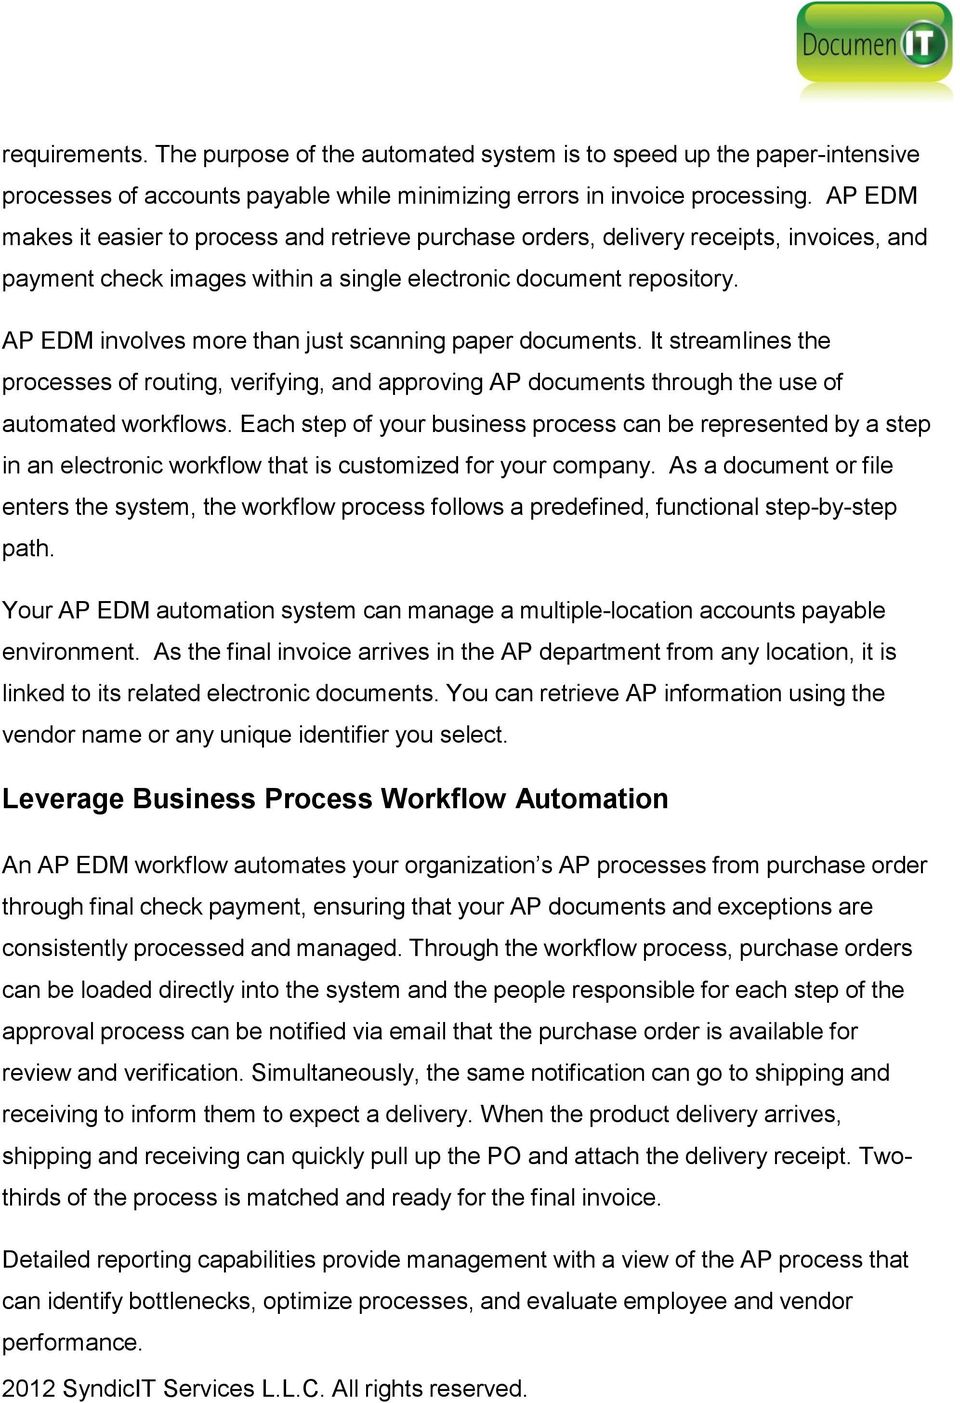 AP EDM involves more than just scanning paper documents. It streamlines the processes of routing, verifying, and approving AP documents through the use of automated workflows.